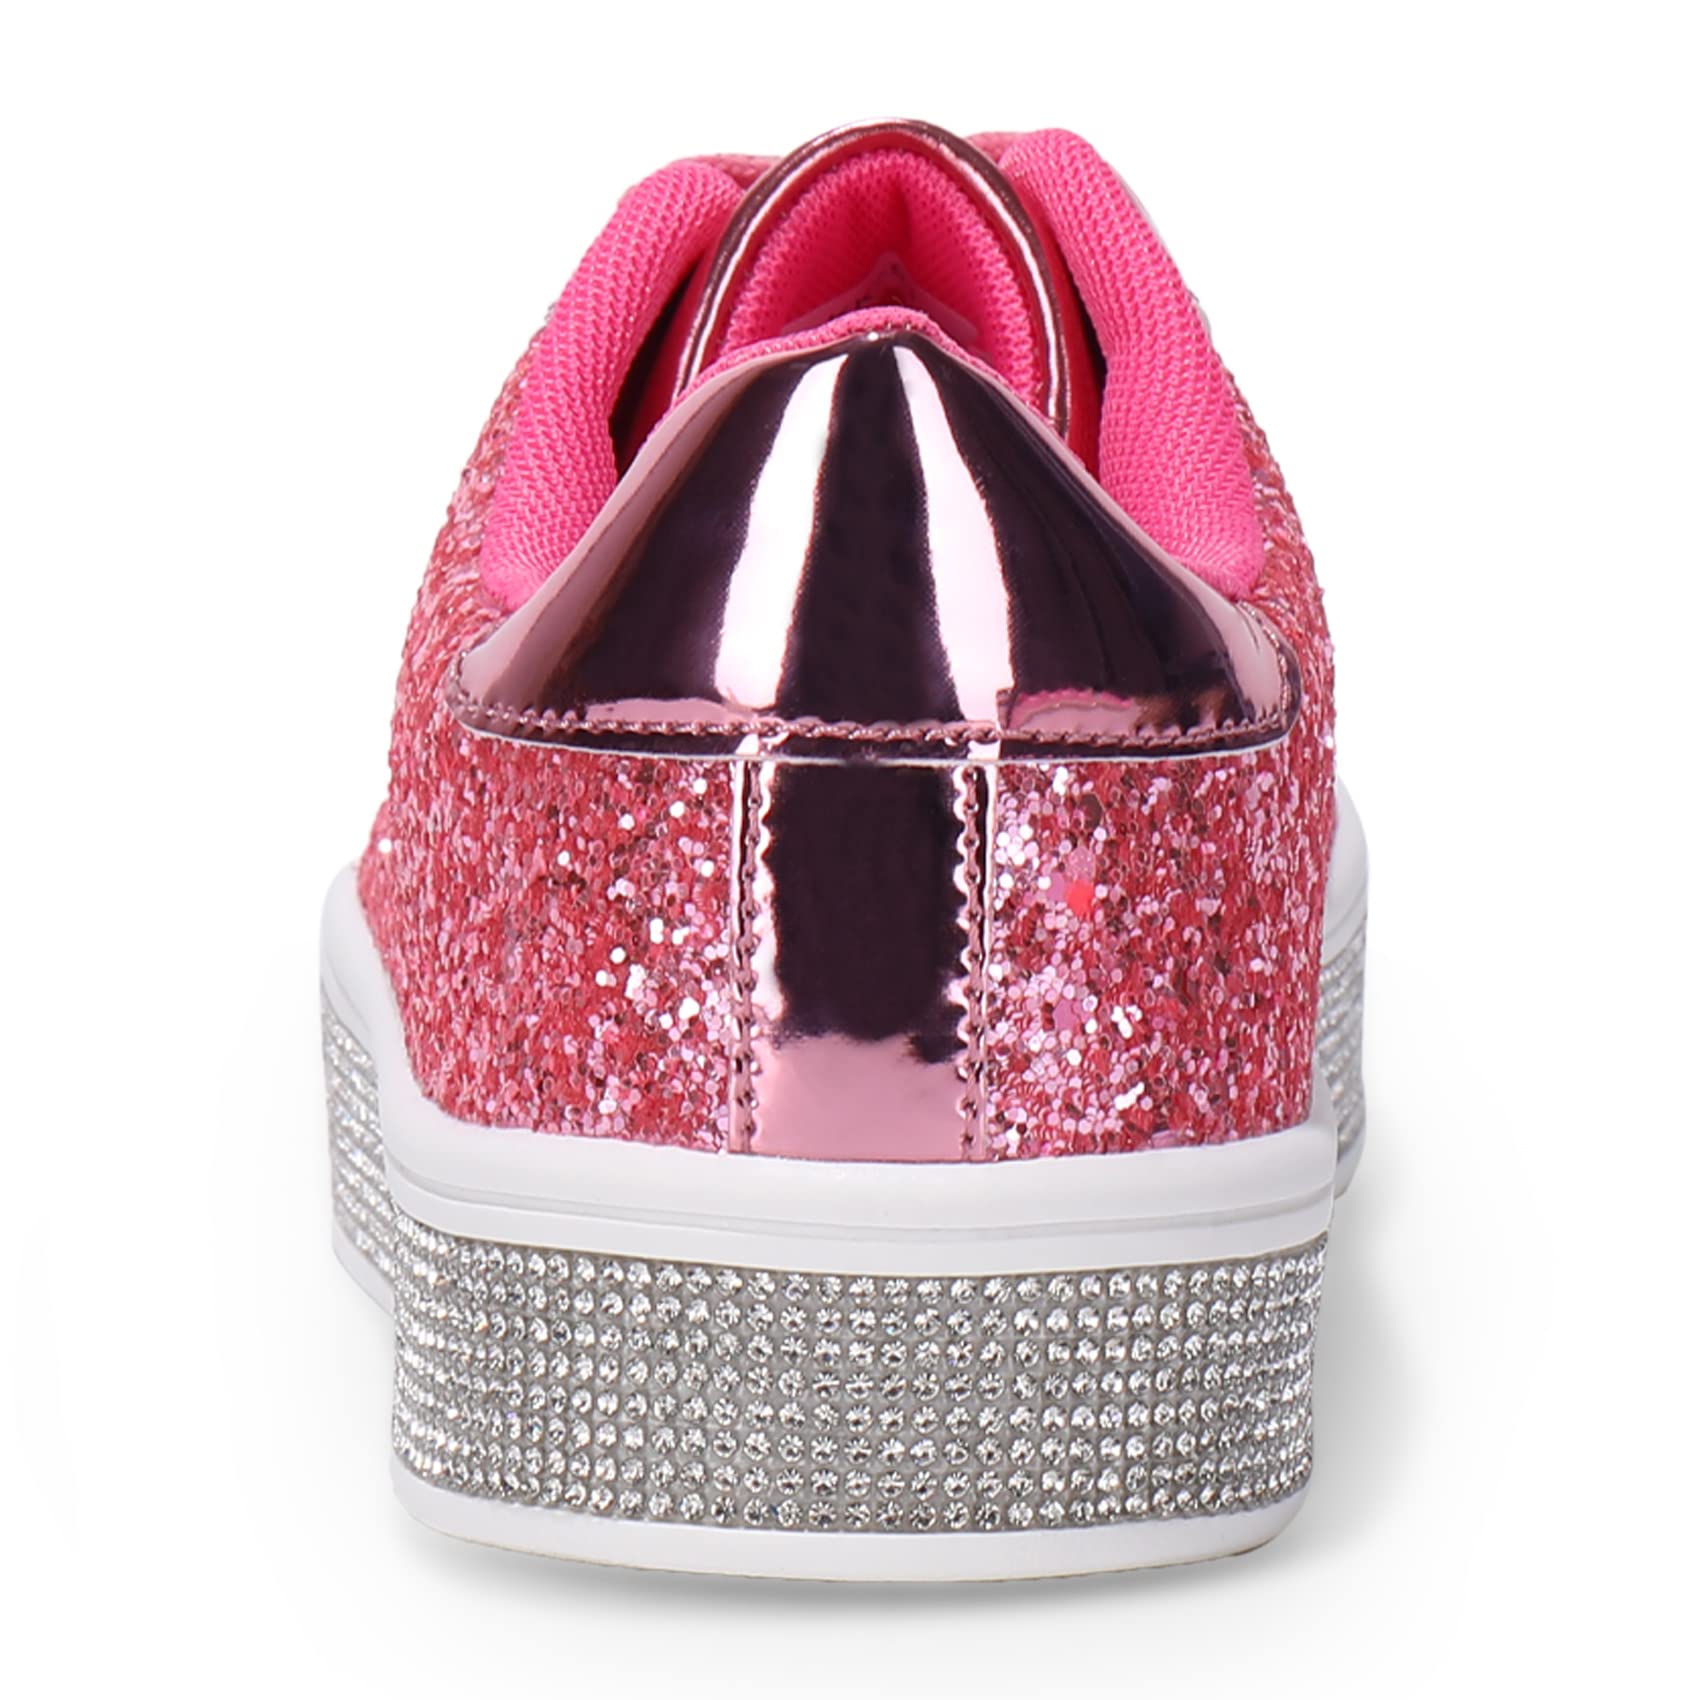 uubaris Women's Glitter Tennis Sneakers Neon Dressy Sparkly Sneakers Rhinestone Bling Wedding Bridal Shoes Shiny Sequin Shoes